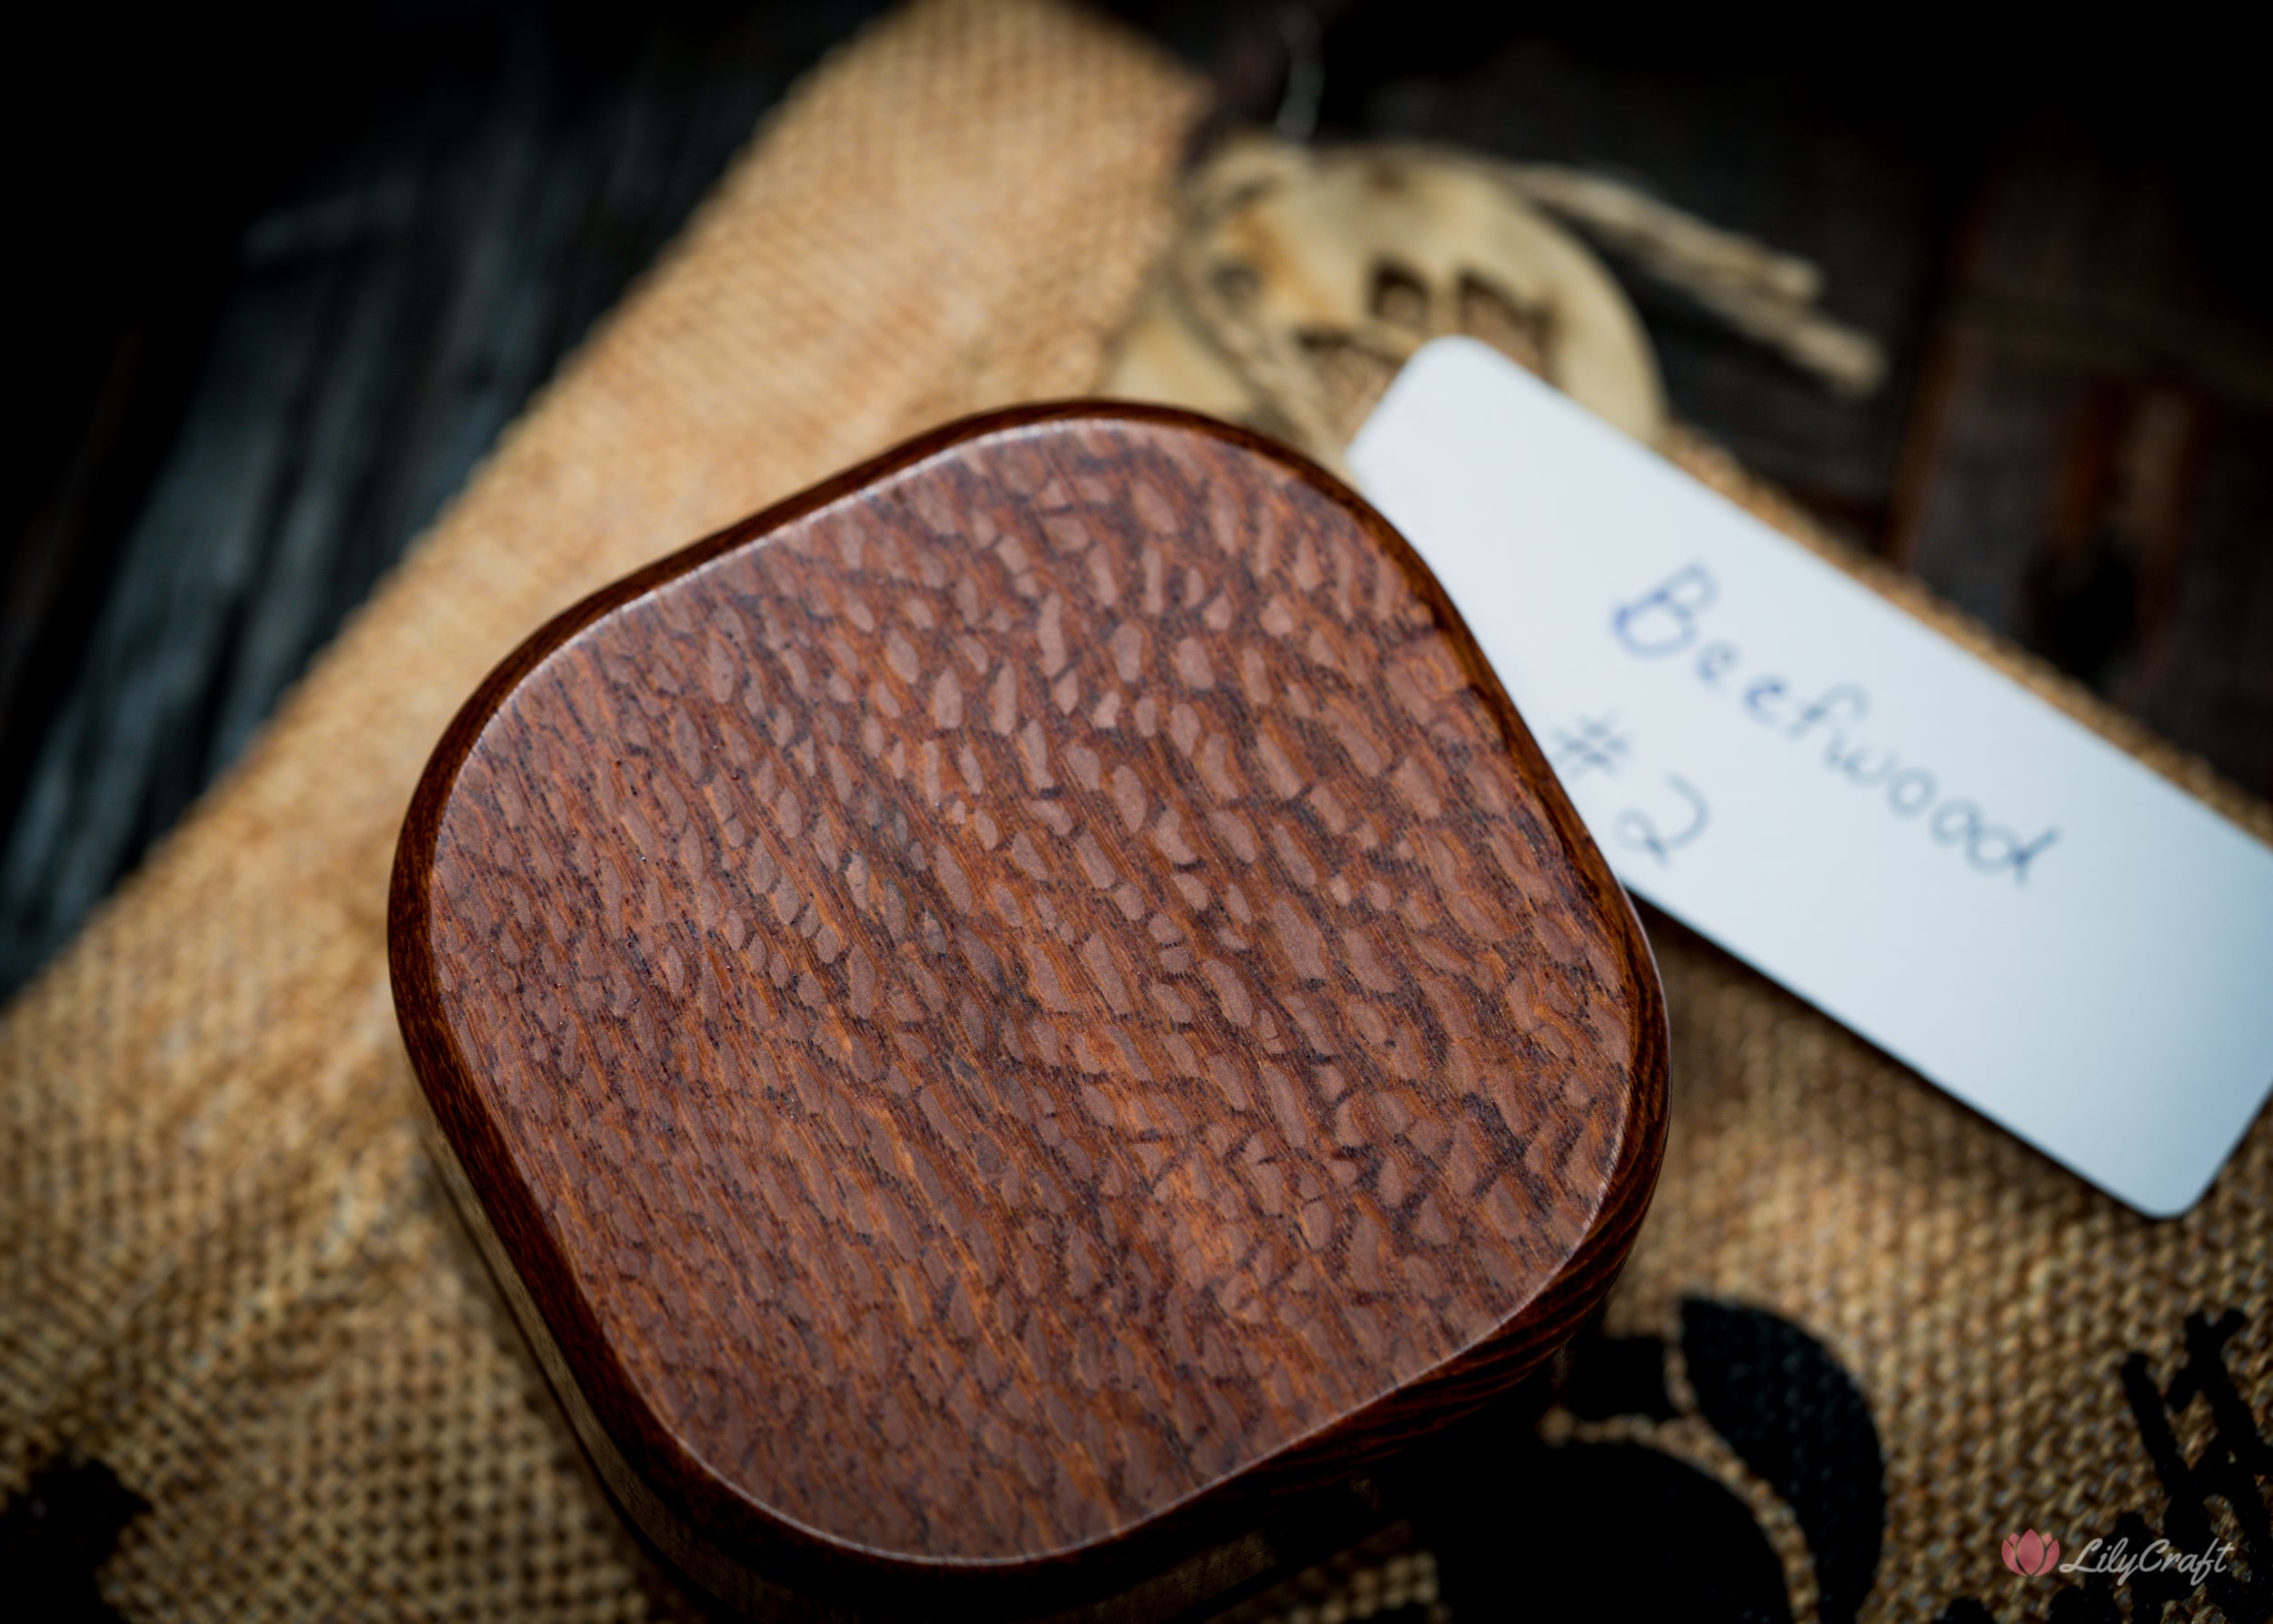 Rare wooden compass presented in an eco-friendly hessian bag.